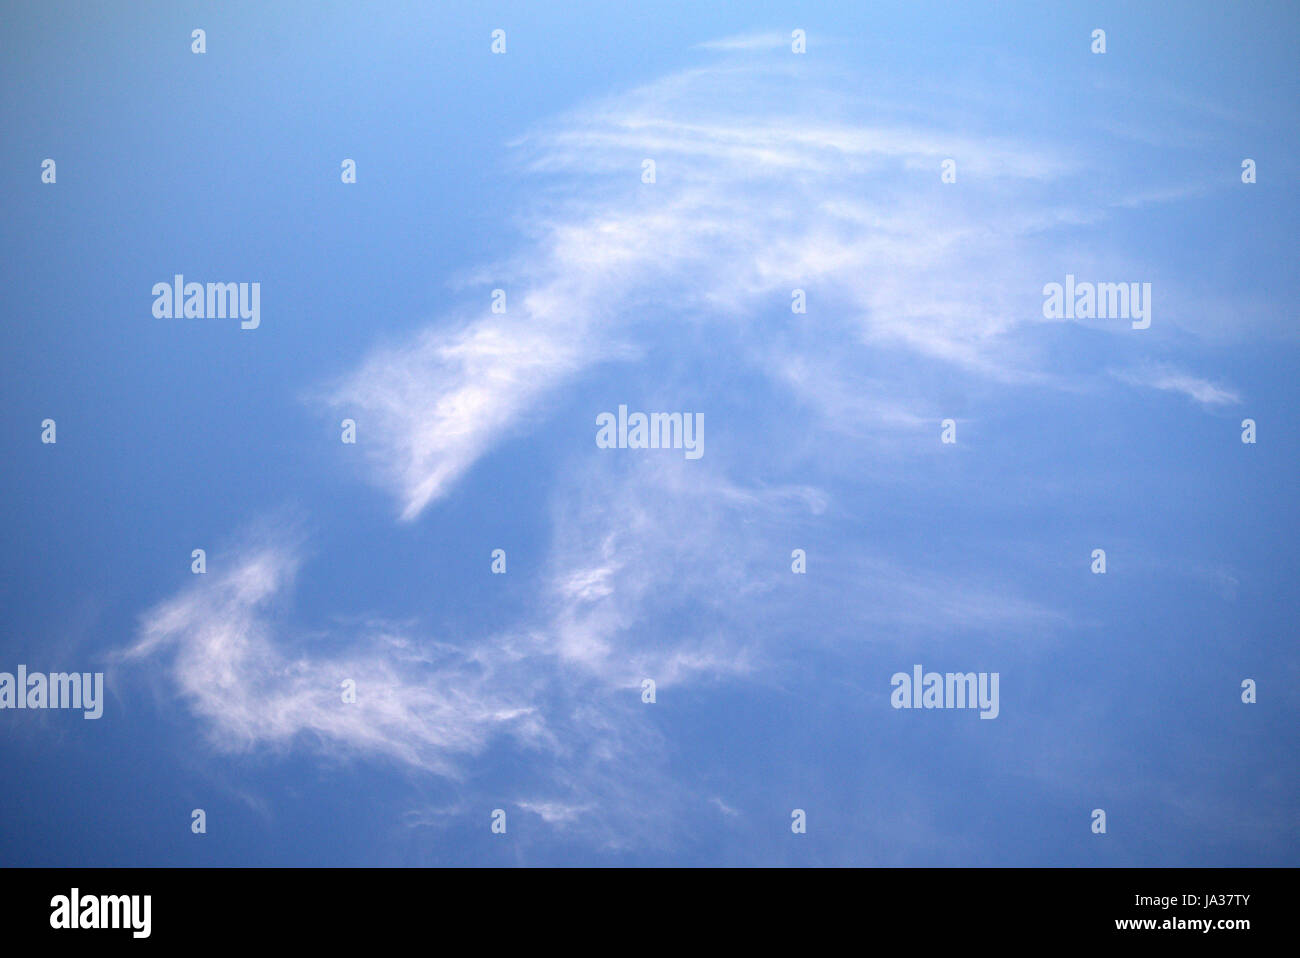 blue sky cirrus clouds white mans face or mask  natural not Photoshop Stock Photo